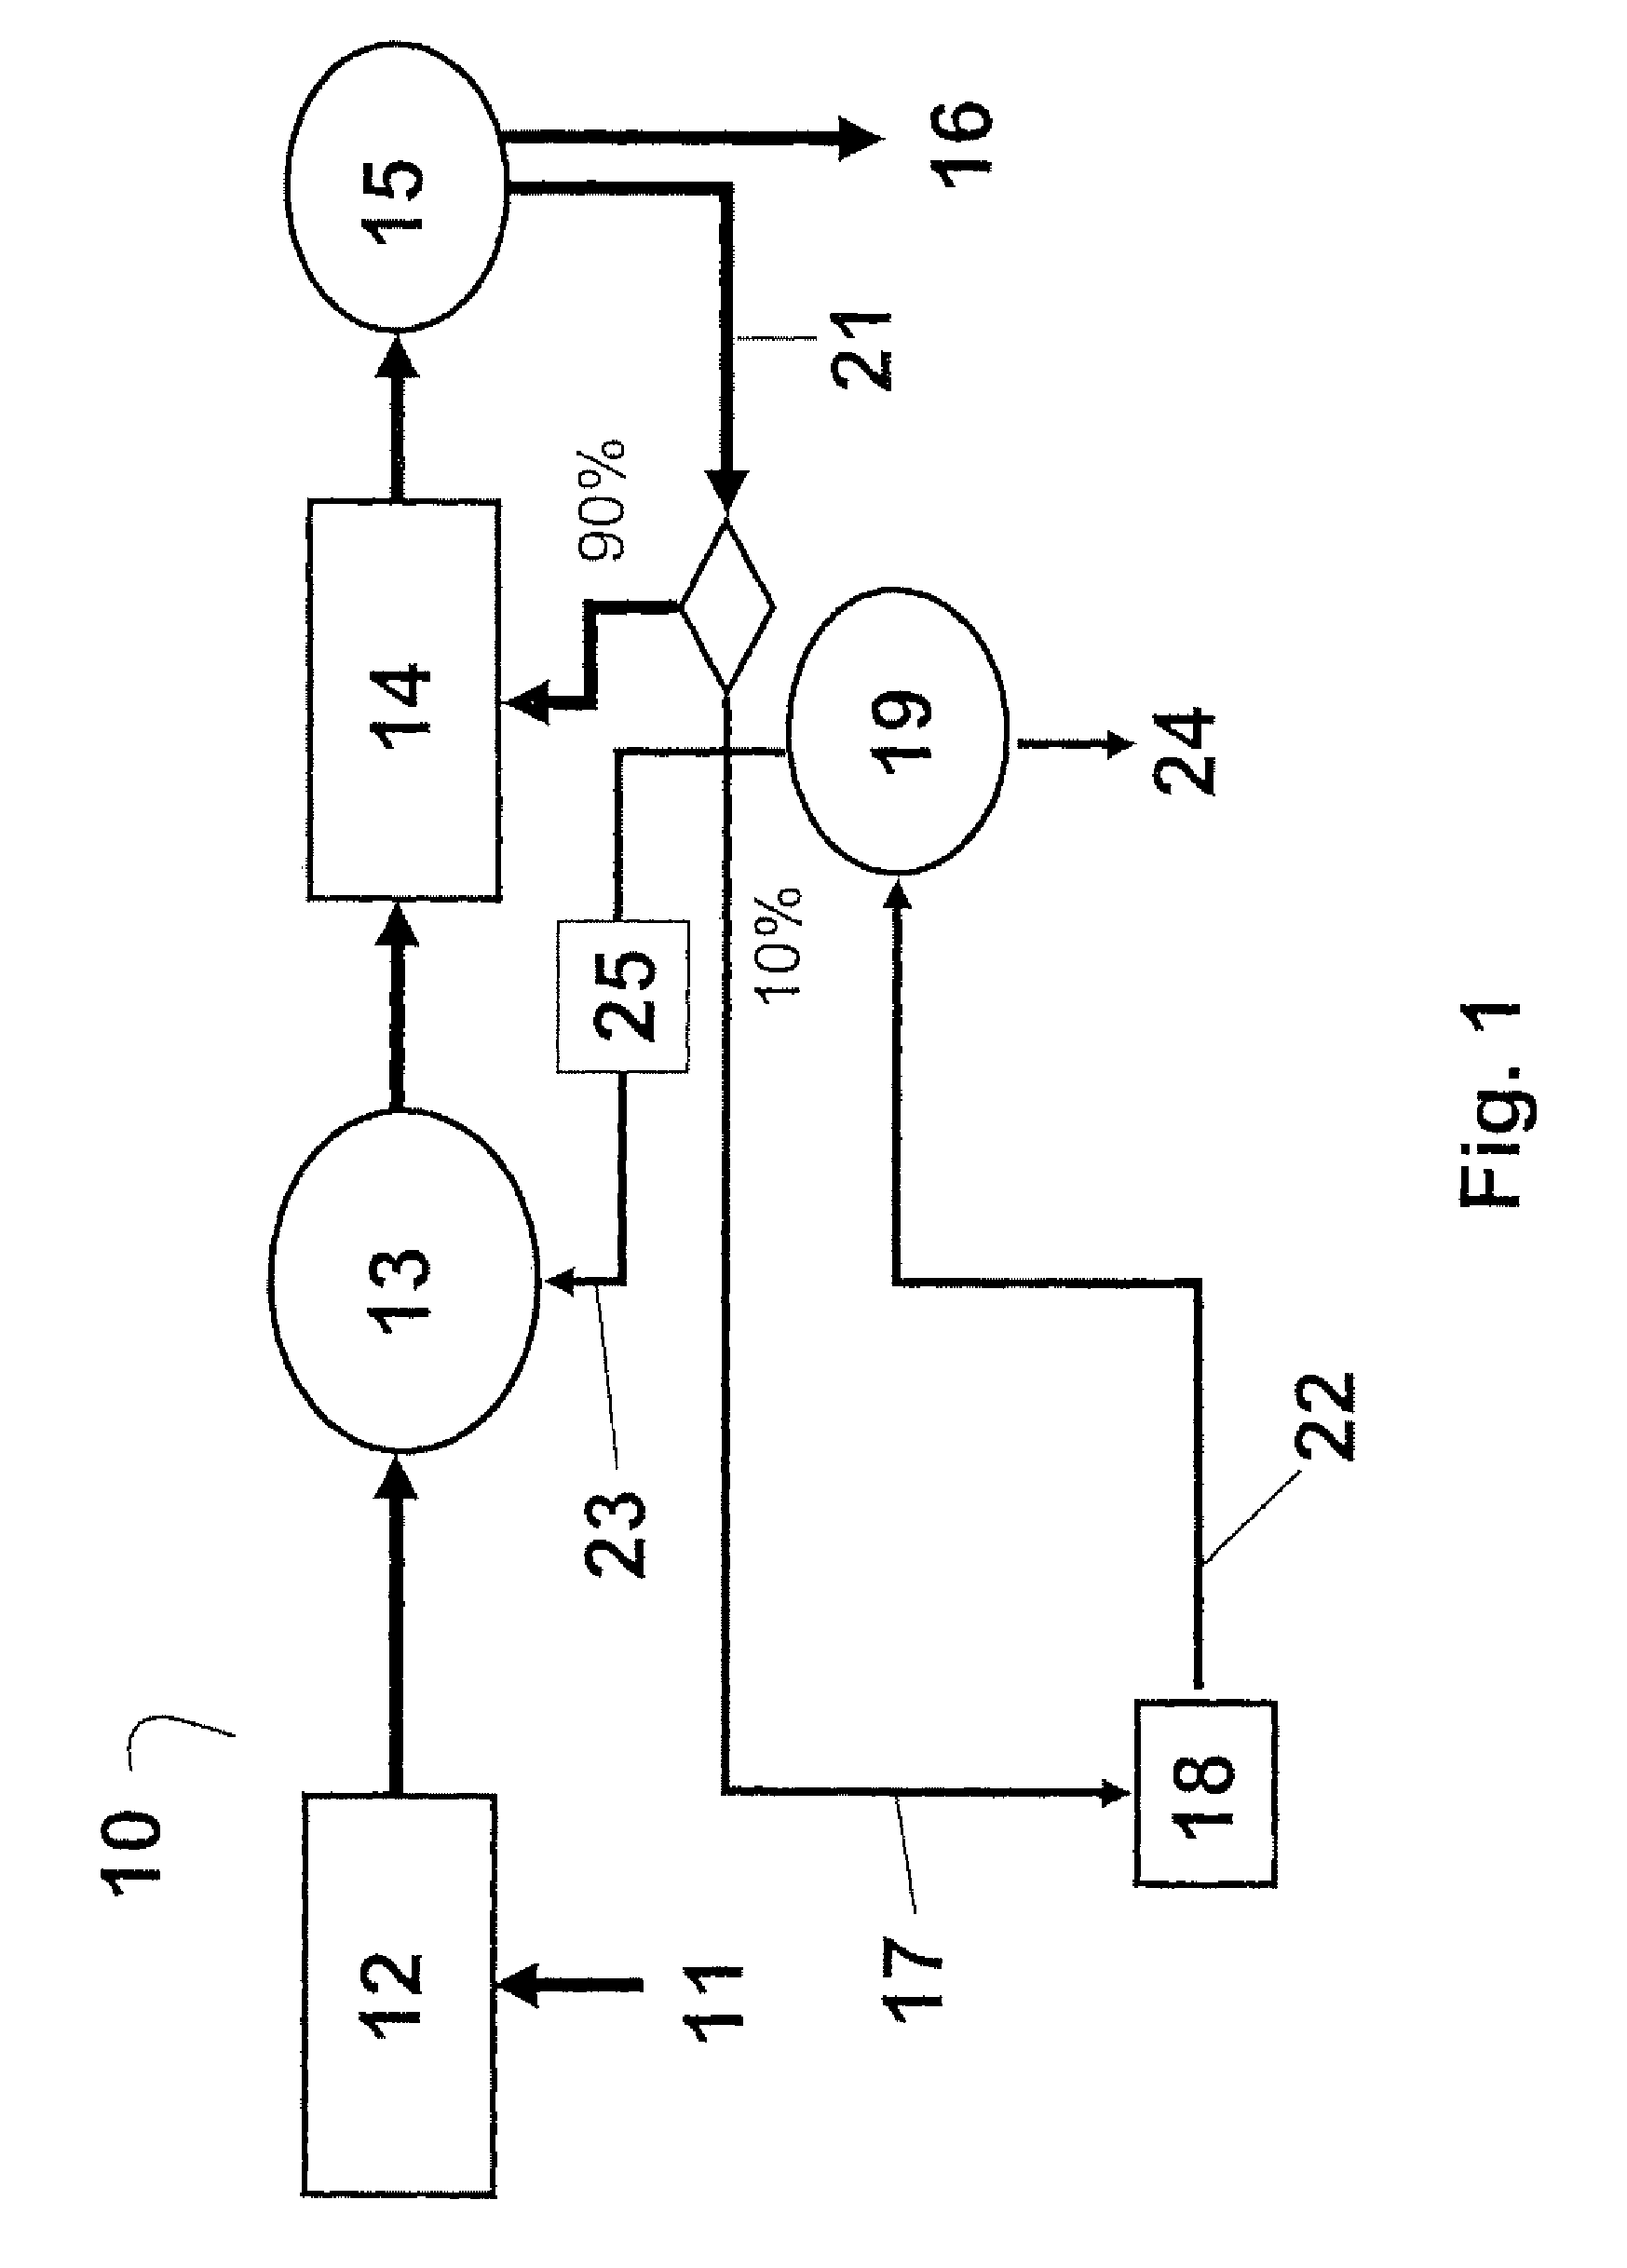 Method and apparatus for continuously controlling denitrification in variable nitrogen loads in wastewater